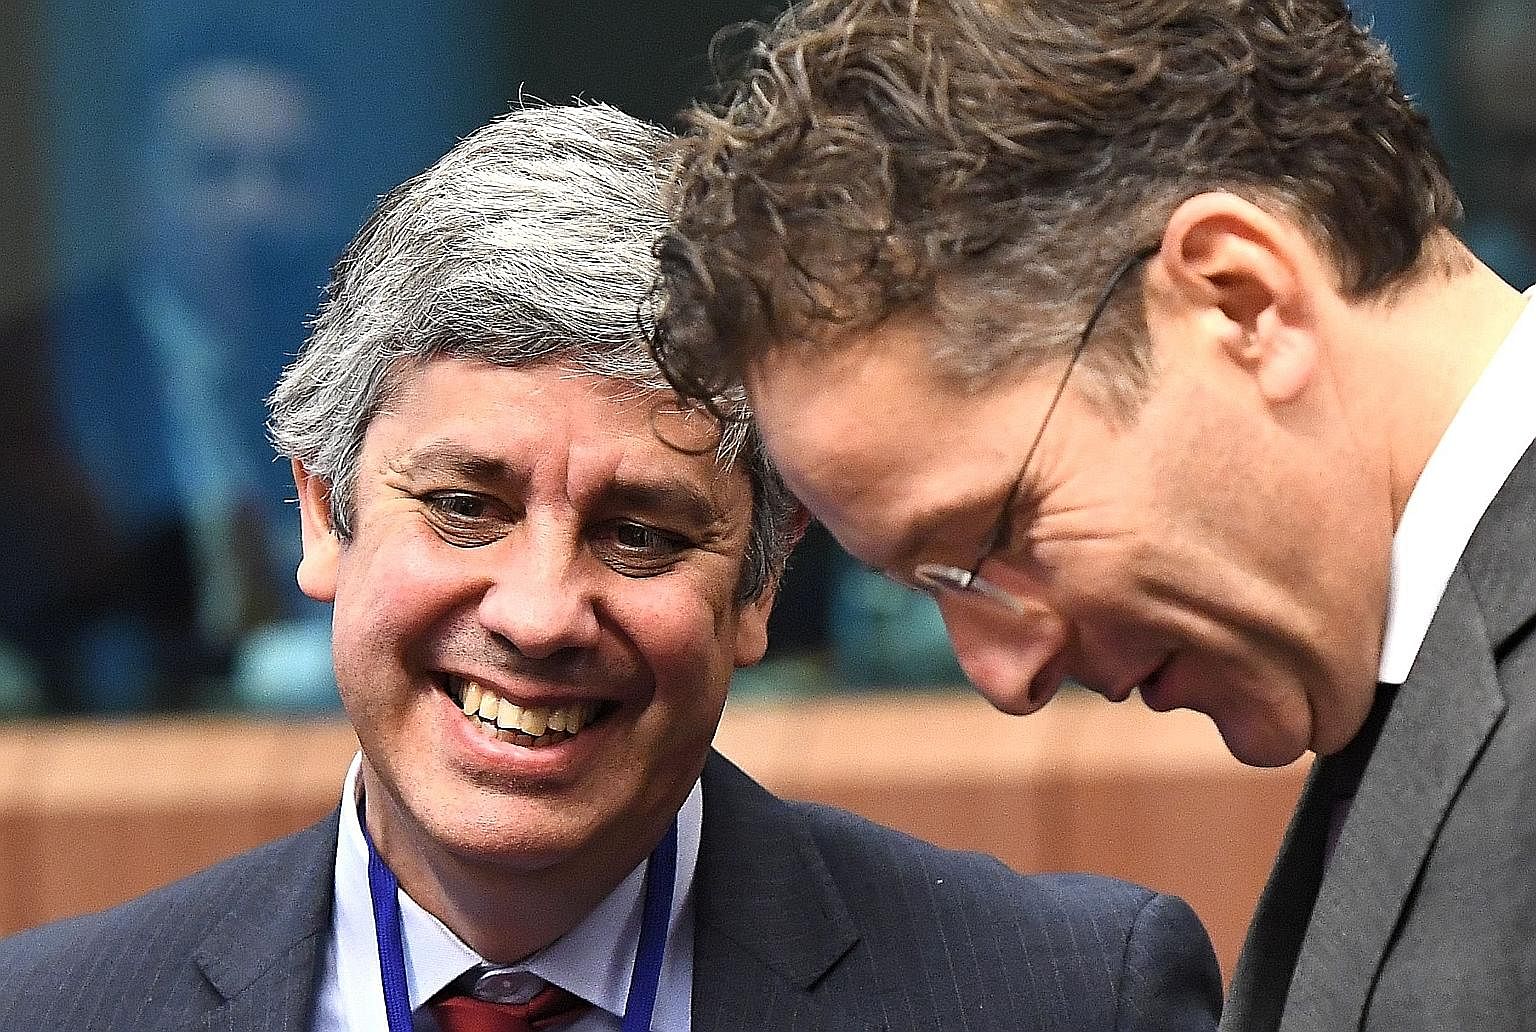 Eurogroup president Jeroen Dijsselbloem (right) and Portugal's Finance Minister Mario Centeno last month. Mr Centeno is the leading contender to replace Mr Dijsselbloem after the latter's term ends in January. Also in the shortlist of candidates aimi